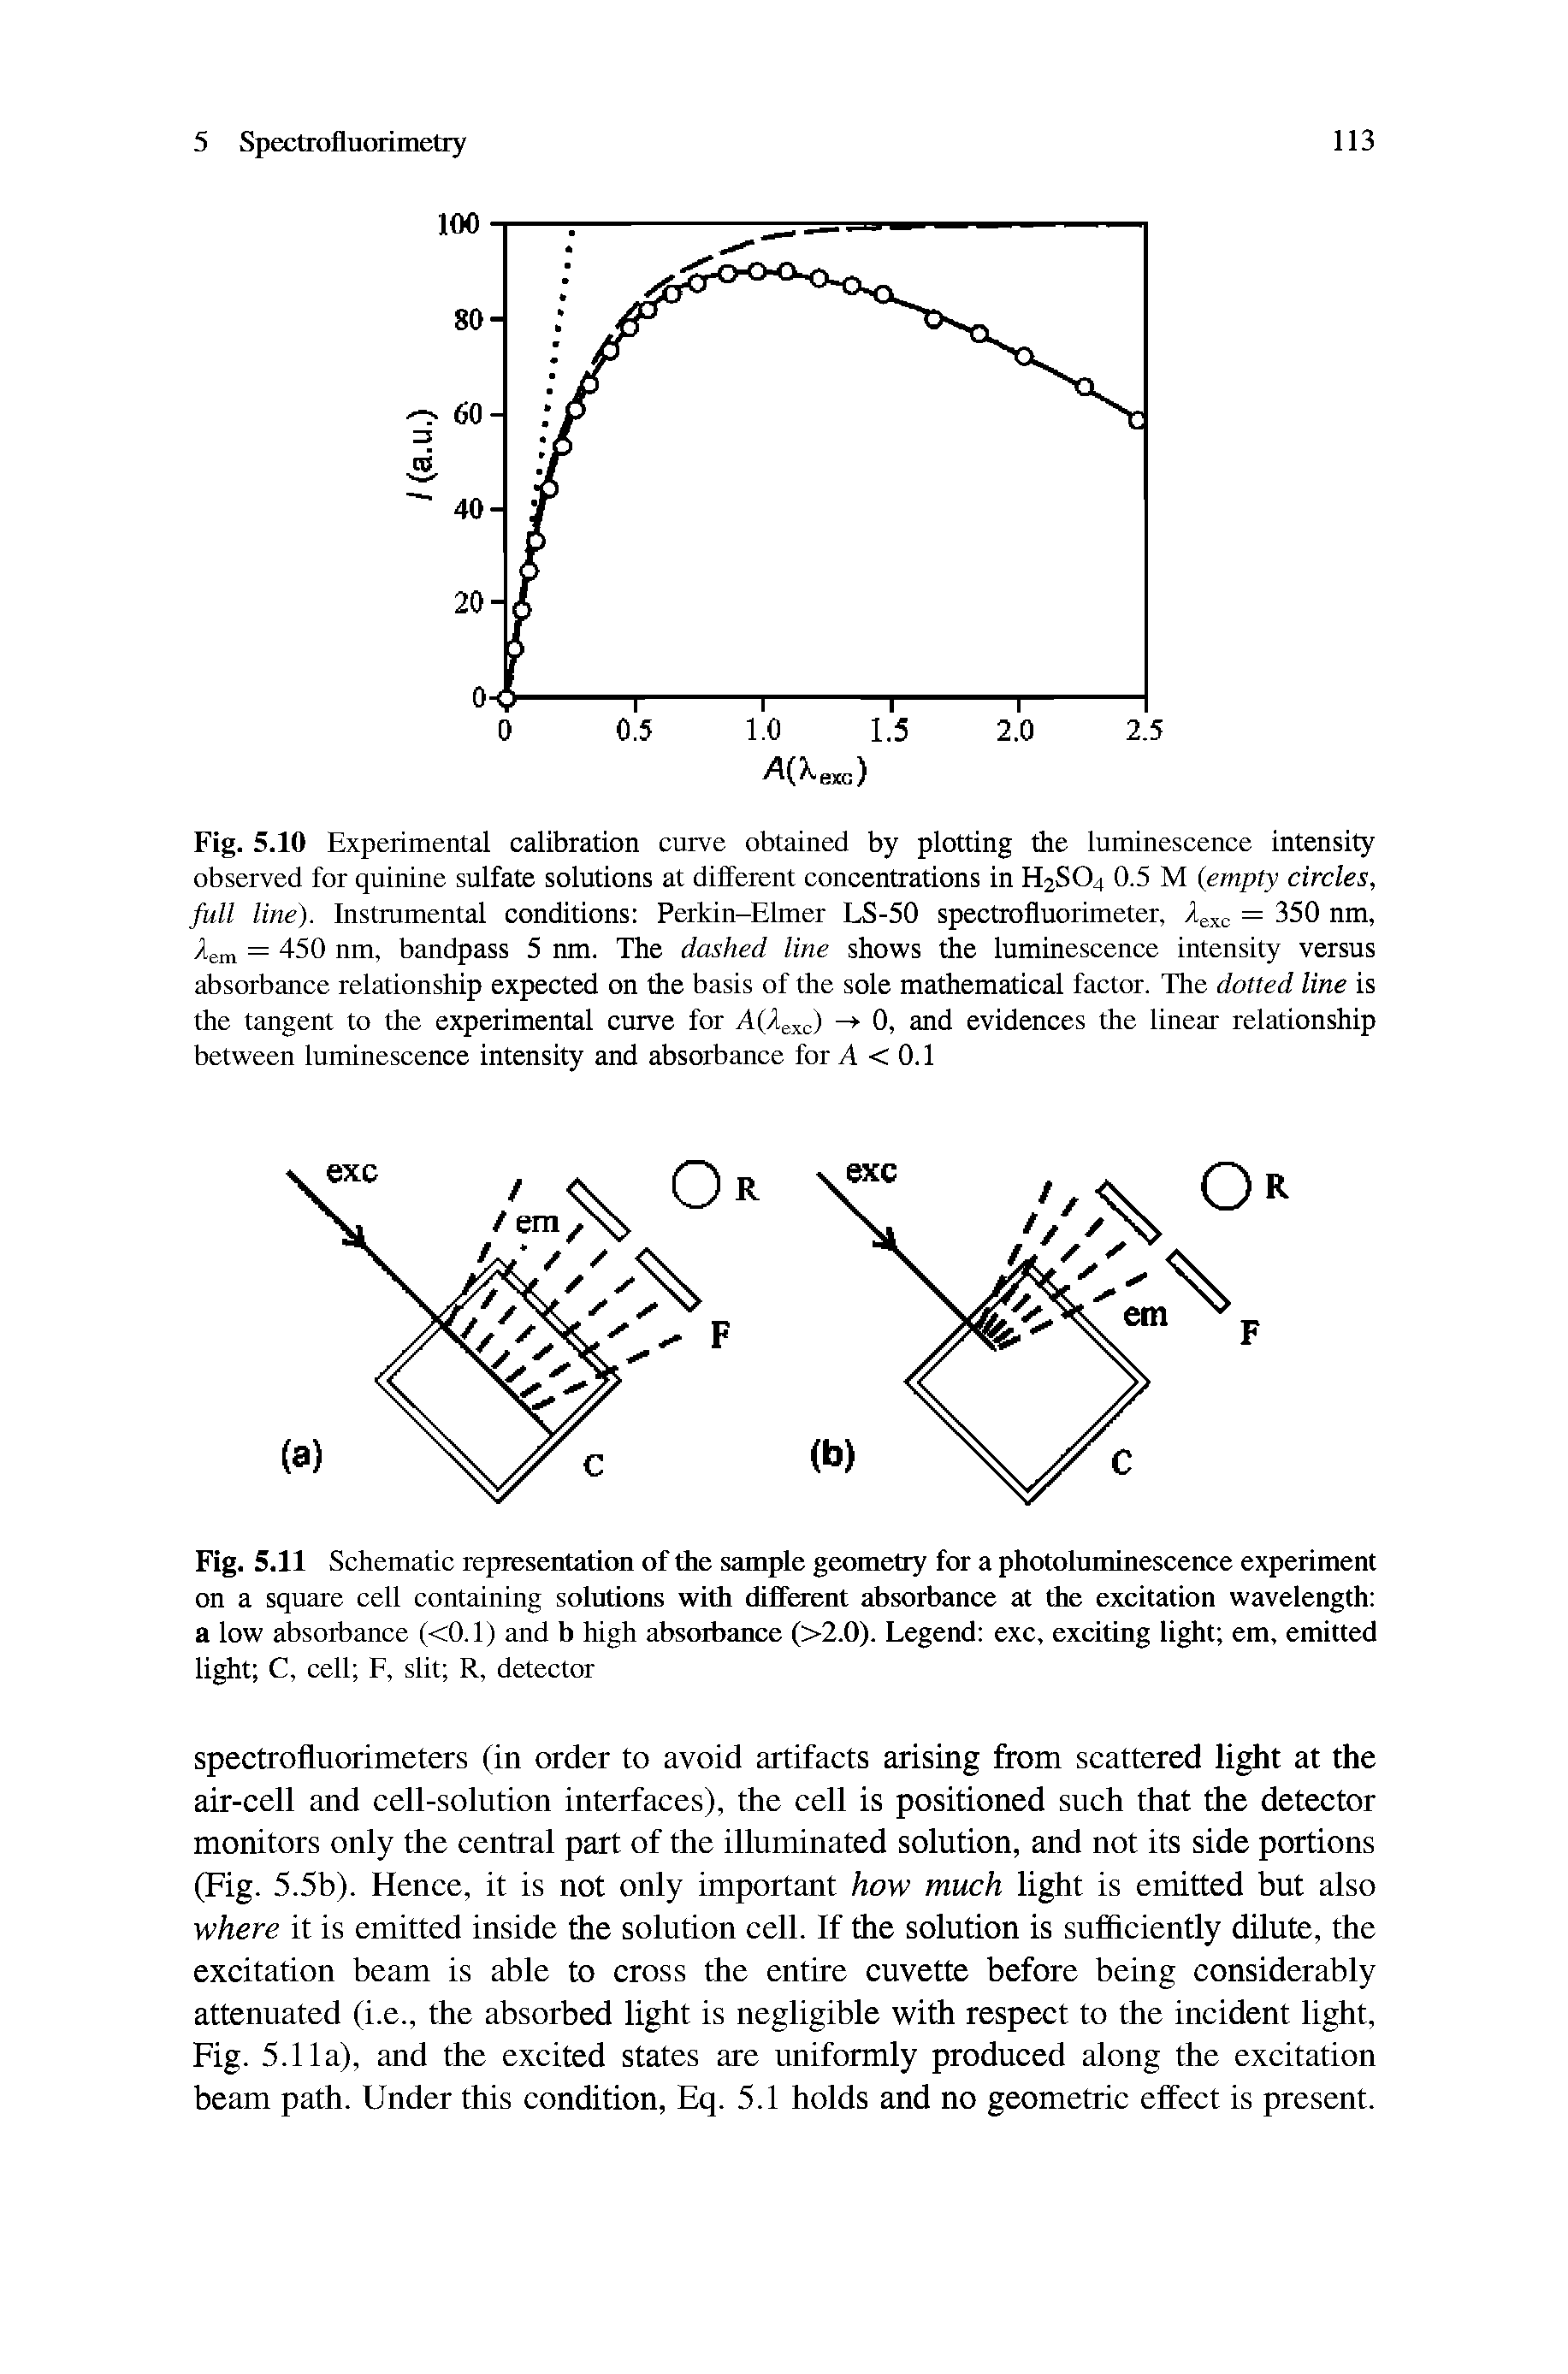 Fig. 5.11 Schematic representation of the sample geometry for a photoluminescence experiment on a square cell containing solutions with different absorbance at the excitation wavelength a low absorbance (<0.1) and b high absorbance (>2.0). Legend exc, exerting light em, emitted light C, cell F, slit R, detector...